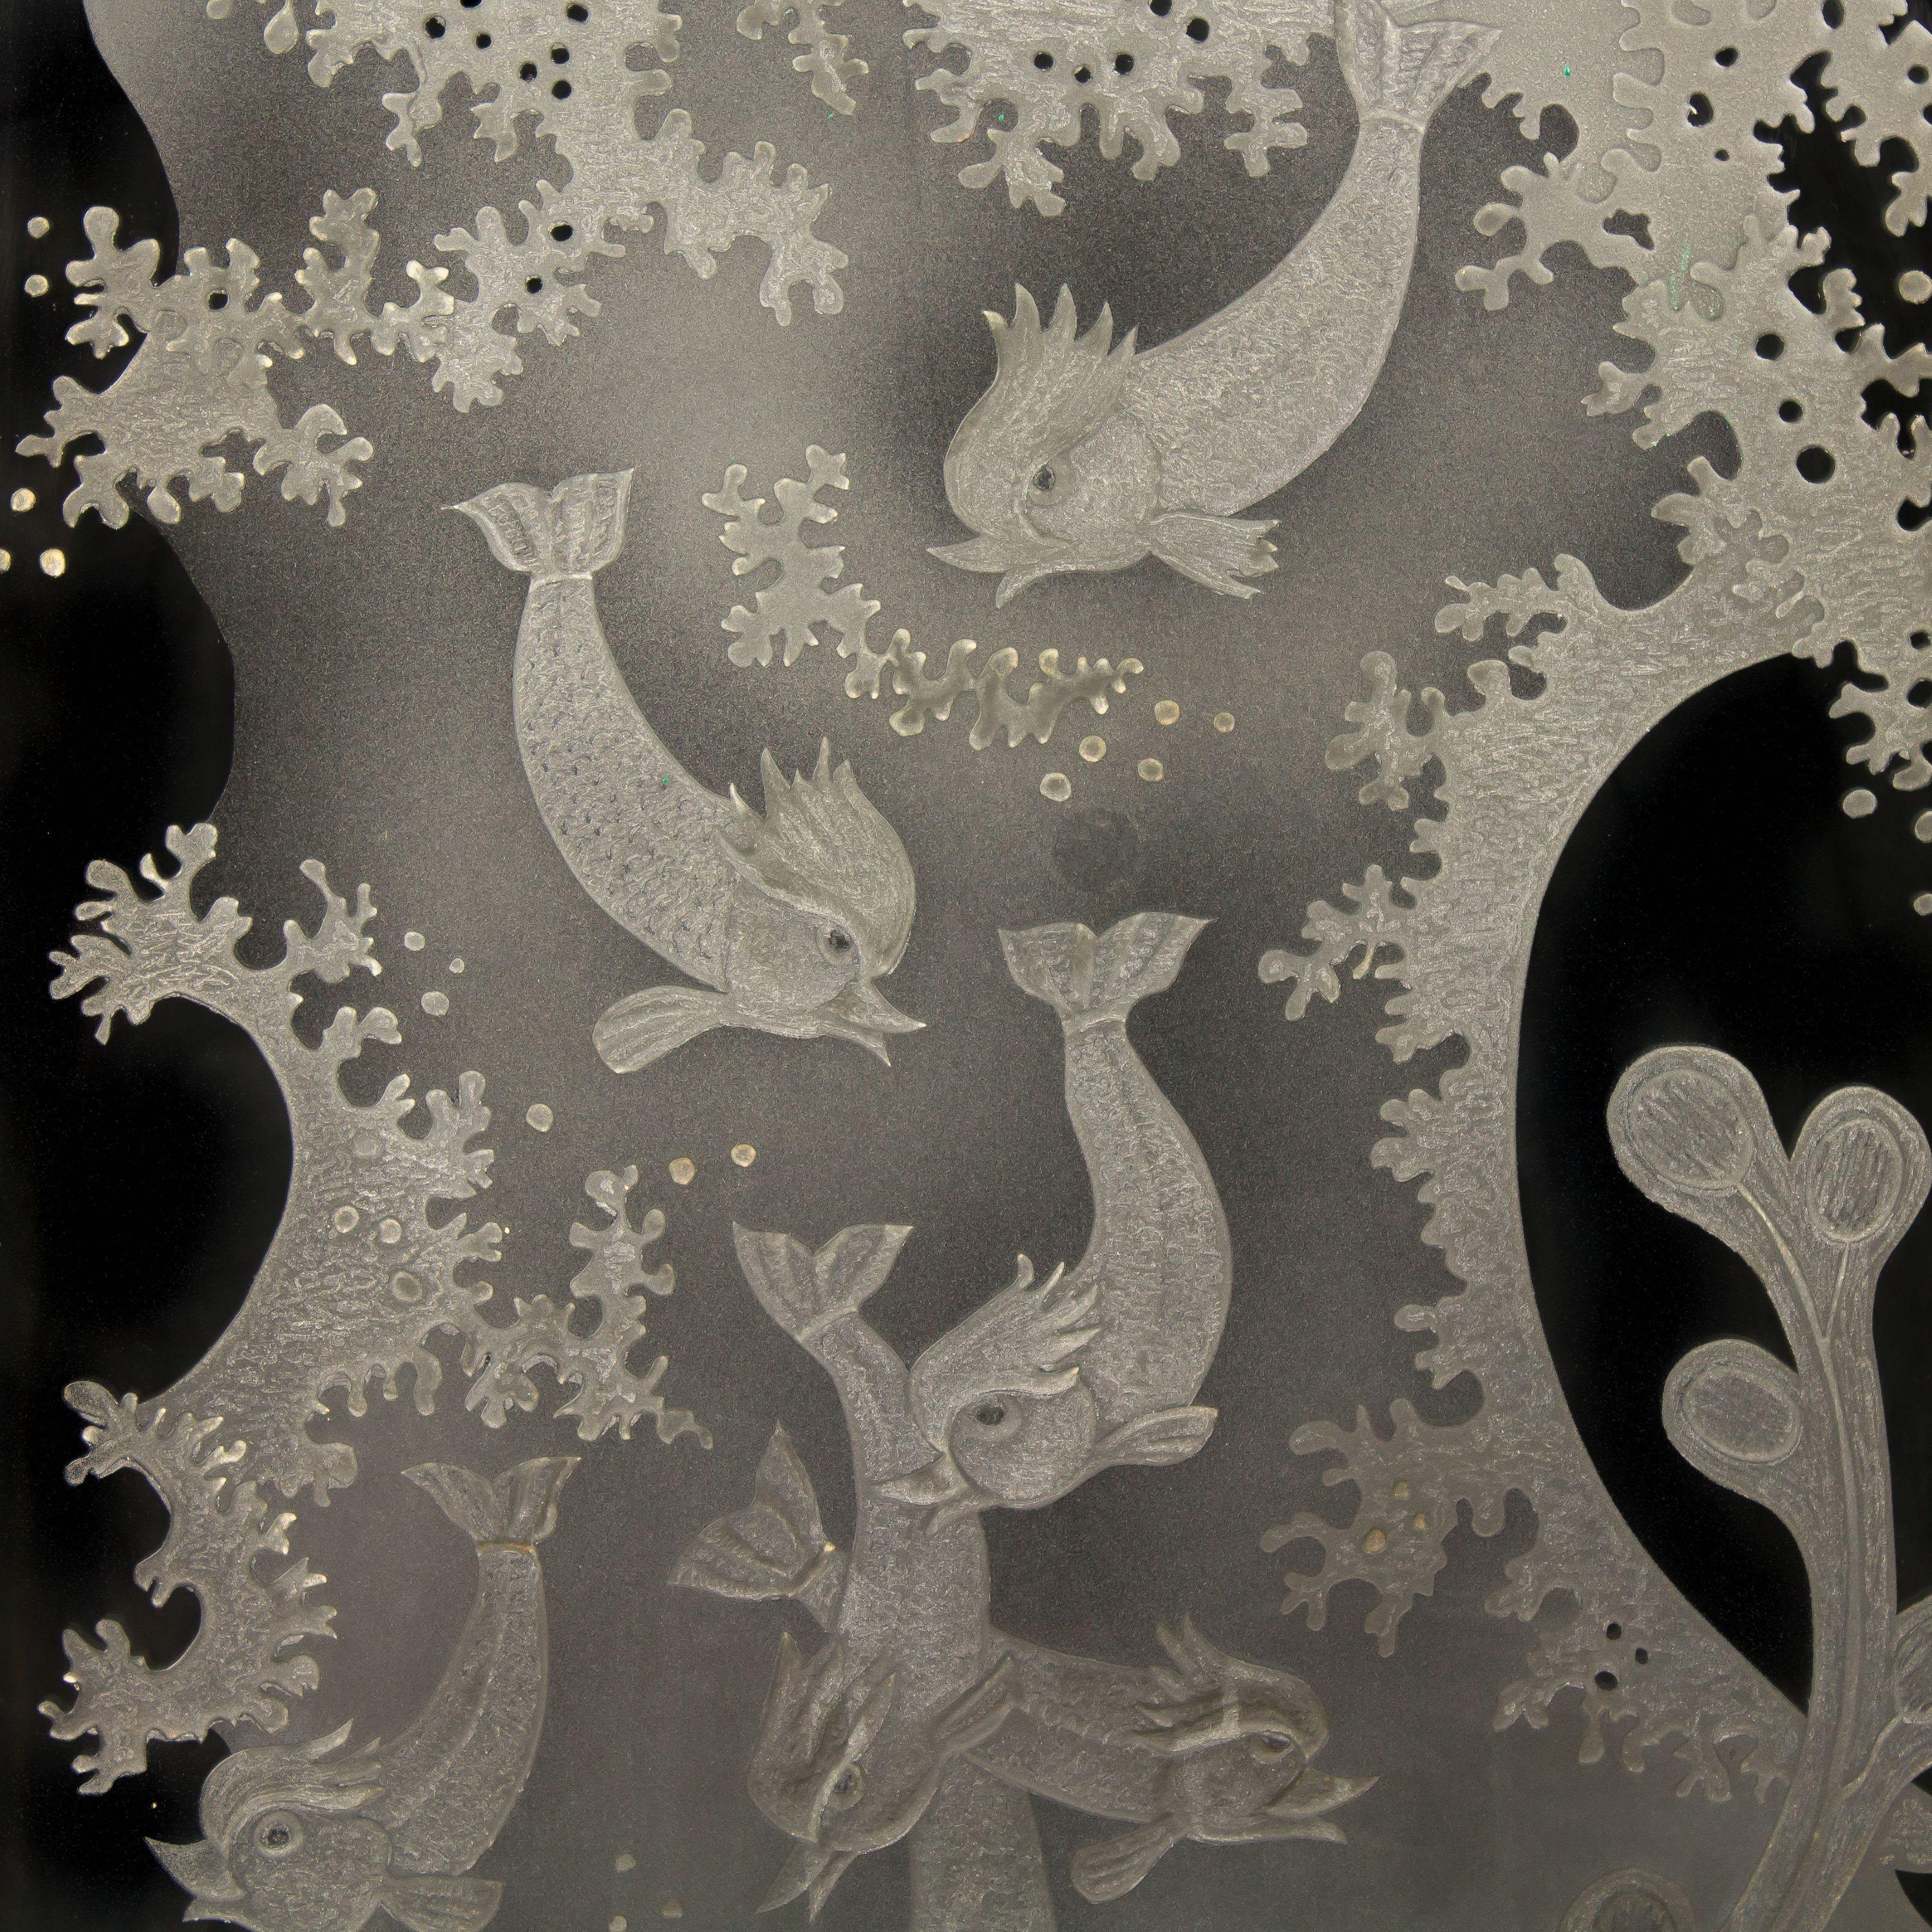 Swedish Unique Pair of Etched Glass Panels by Nils Landberg '1907-1991' For Sale